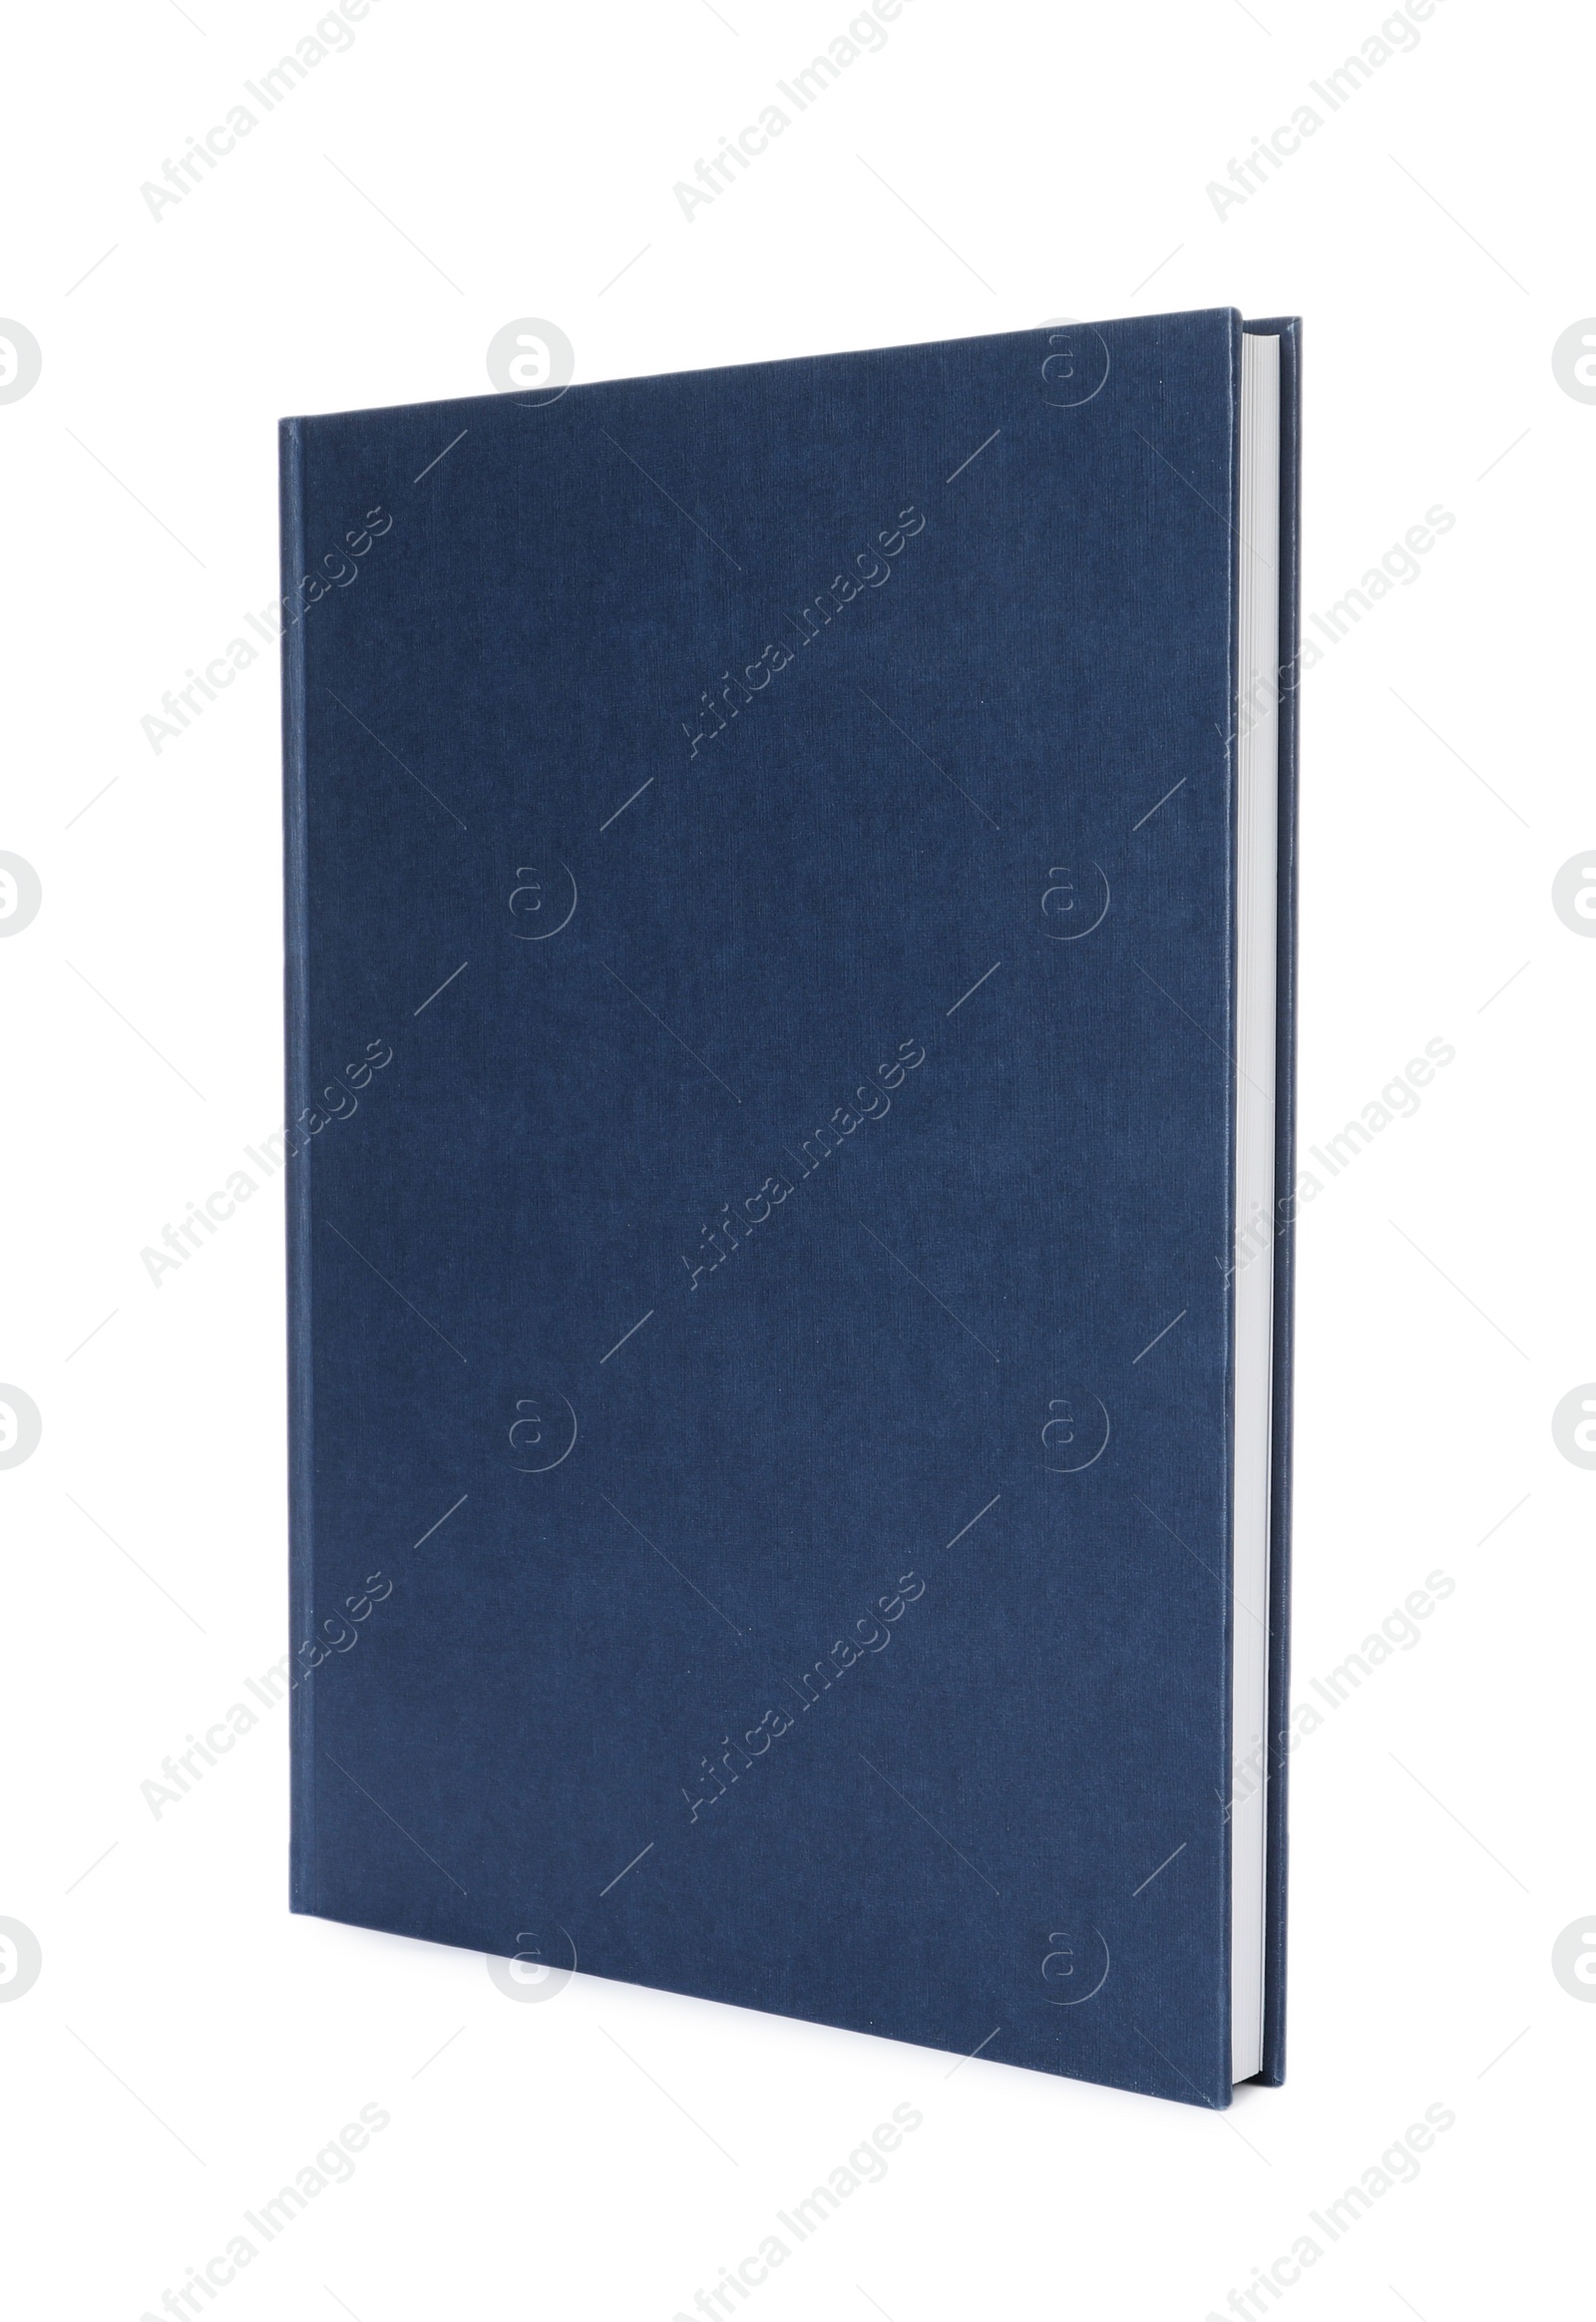 Photo of Closed book with blue hard cover isolated on white